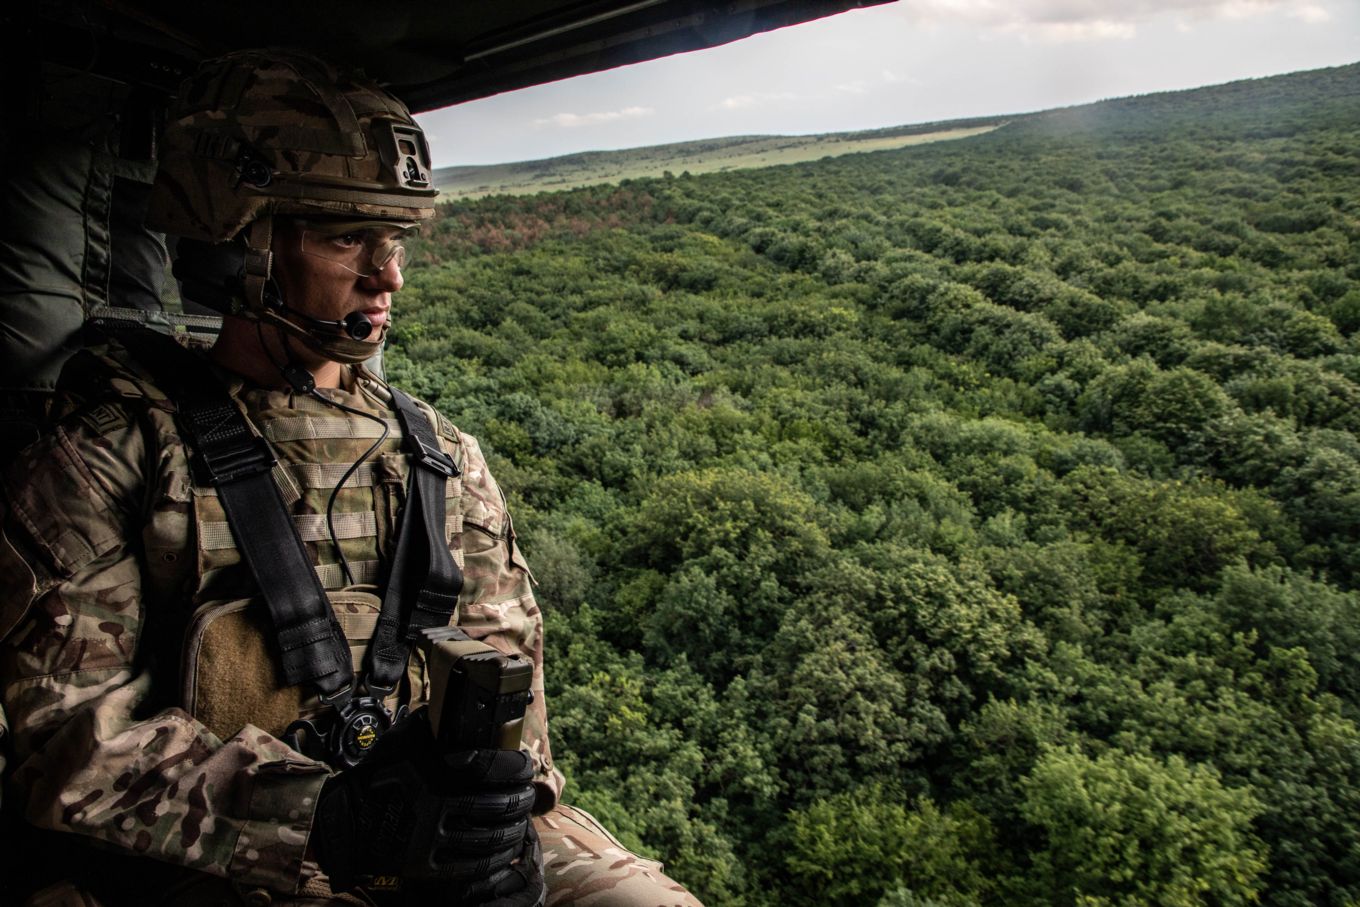 RAF Regiment Gunner looking out of a Hawk Helicopter over treetops.